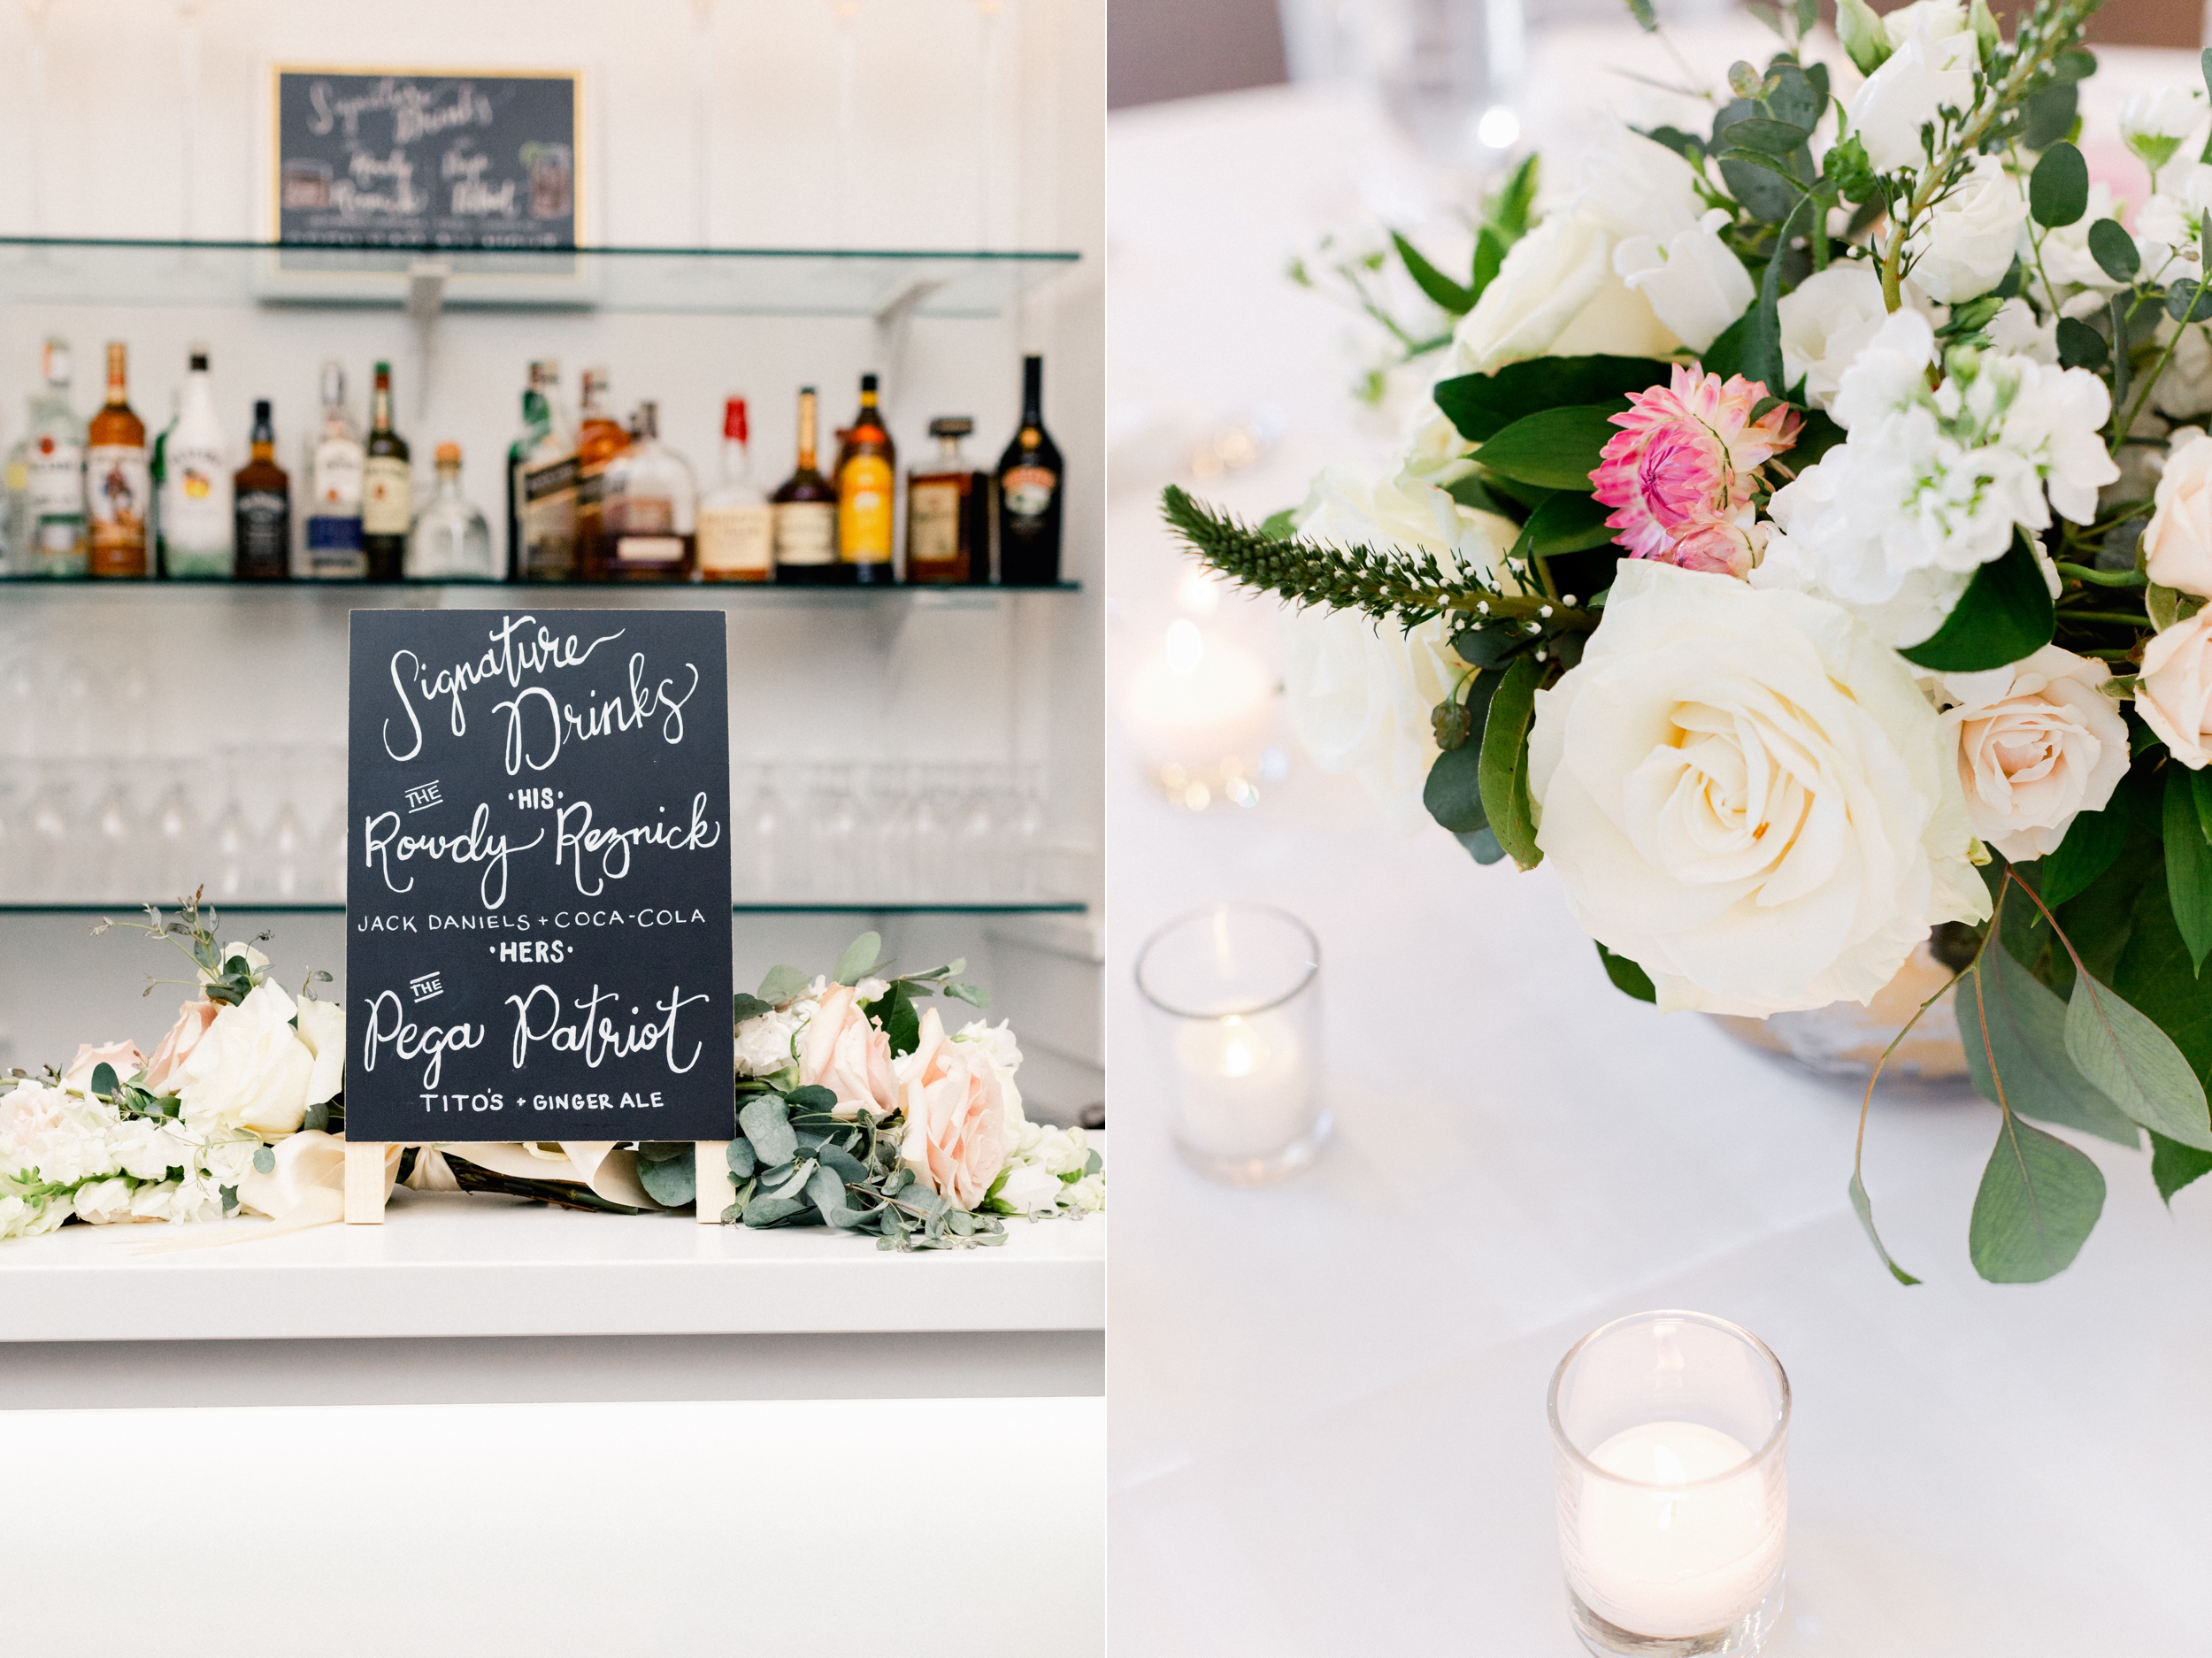 signature drinks and floral arrangements at wedding reception